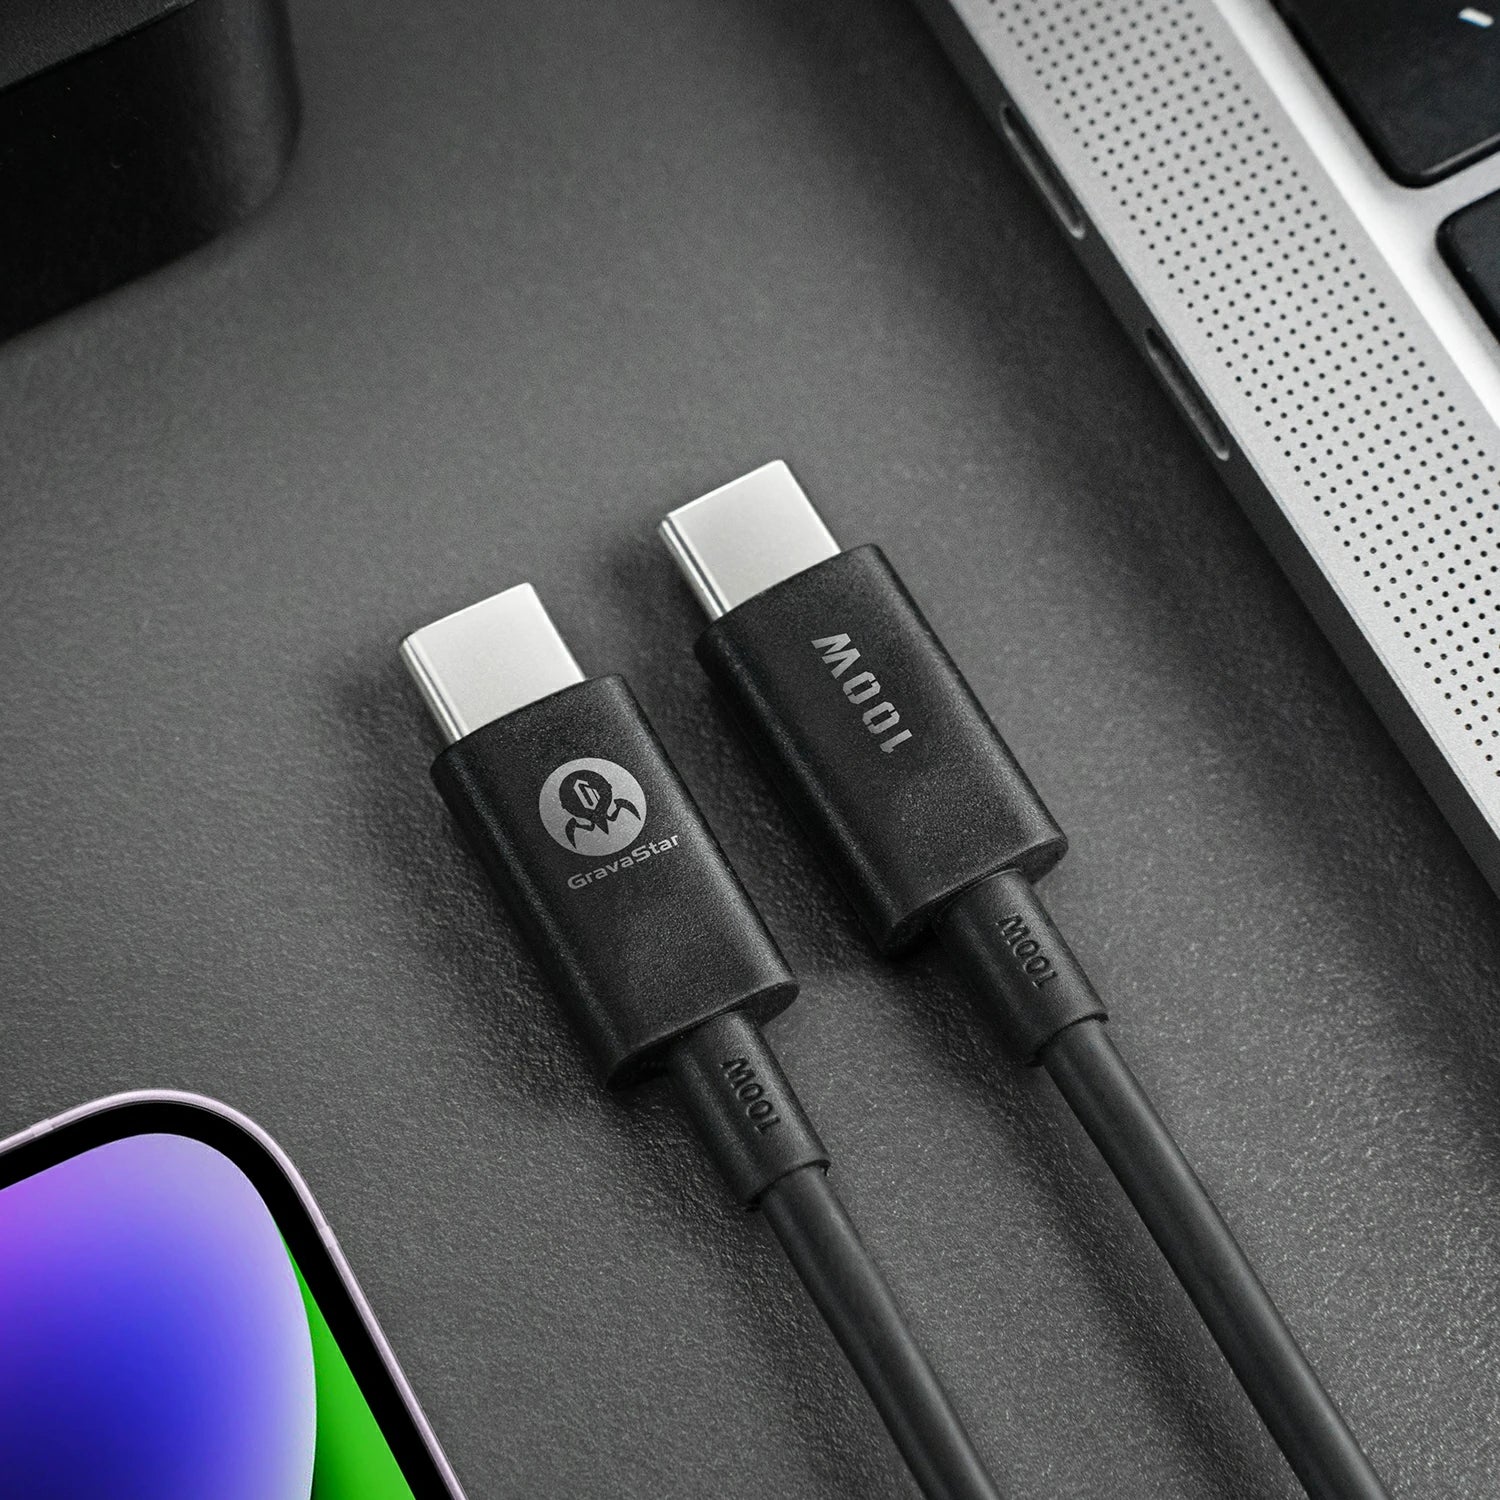 USB-C 100W Cable | 1.5m